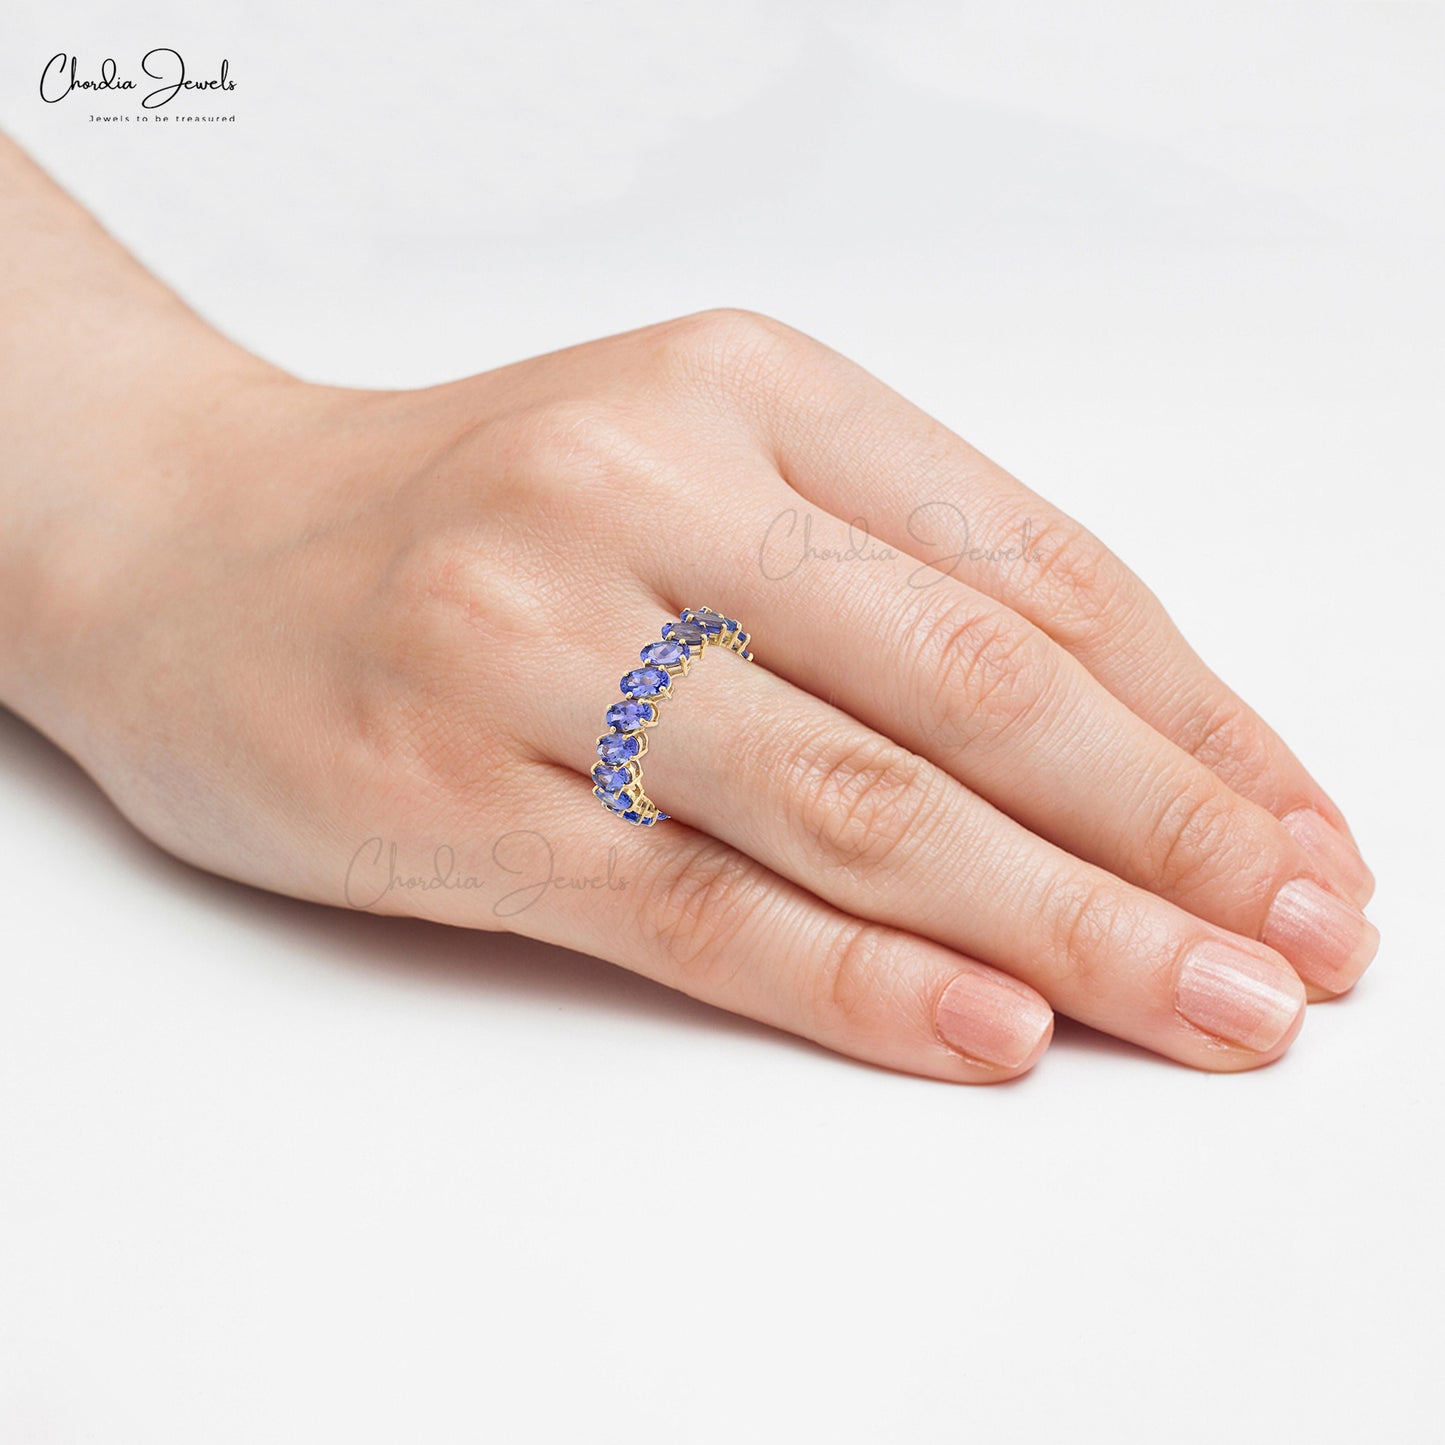 Stackable Eternity Ring With Tanzanite Gemstone 14k Solid Gold Prong Set Engagement Ring